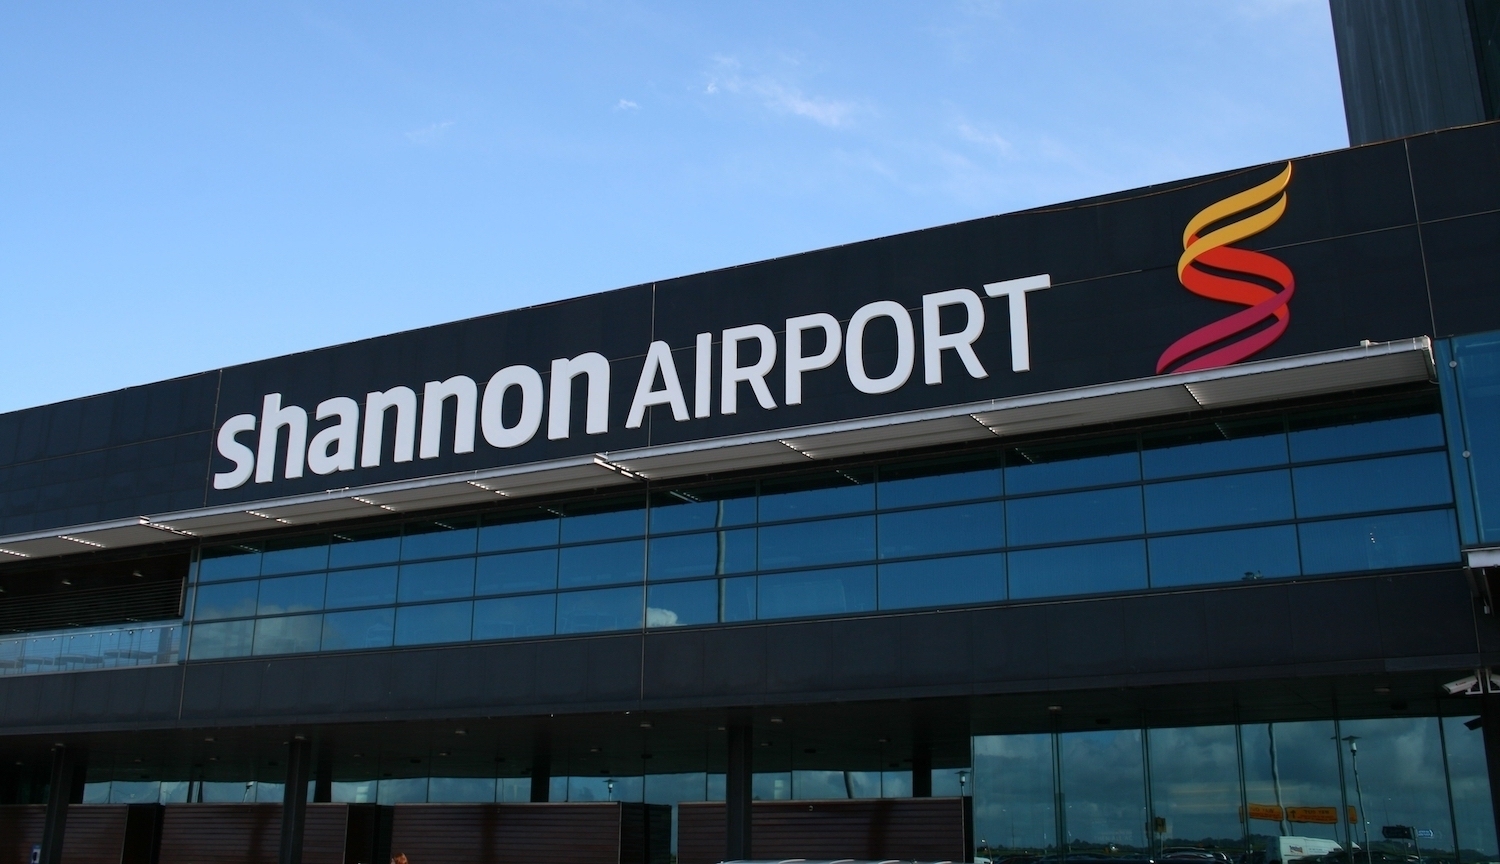 Shannon Group World Kindness Day - an initiative will launch on World Kindness Day to acknowledge Shannon airport’s customers who have shown kindness in their communities.